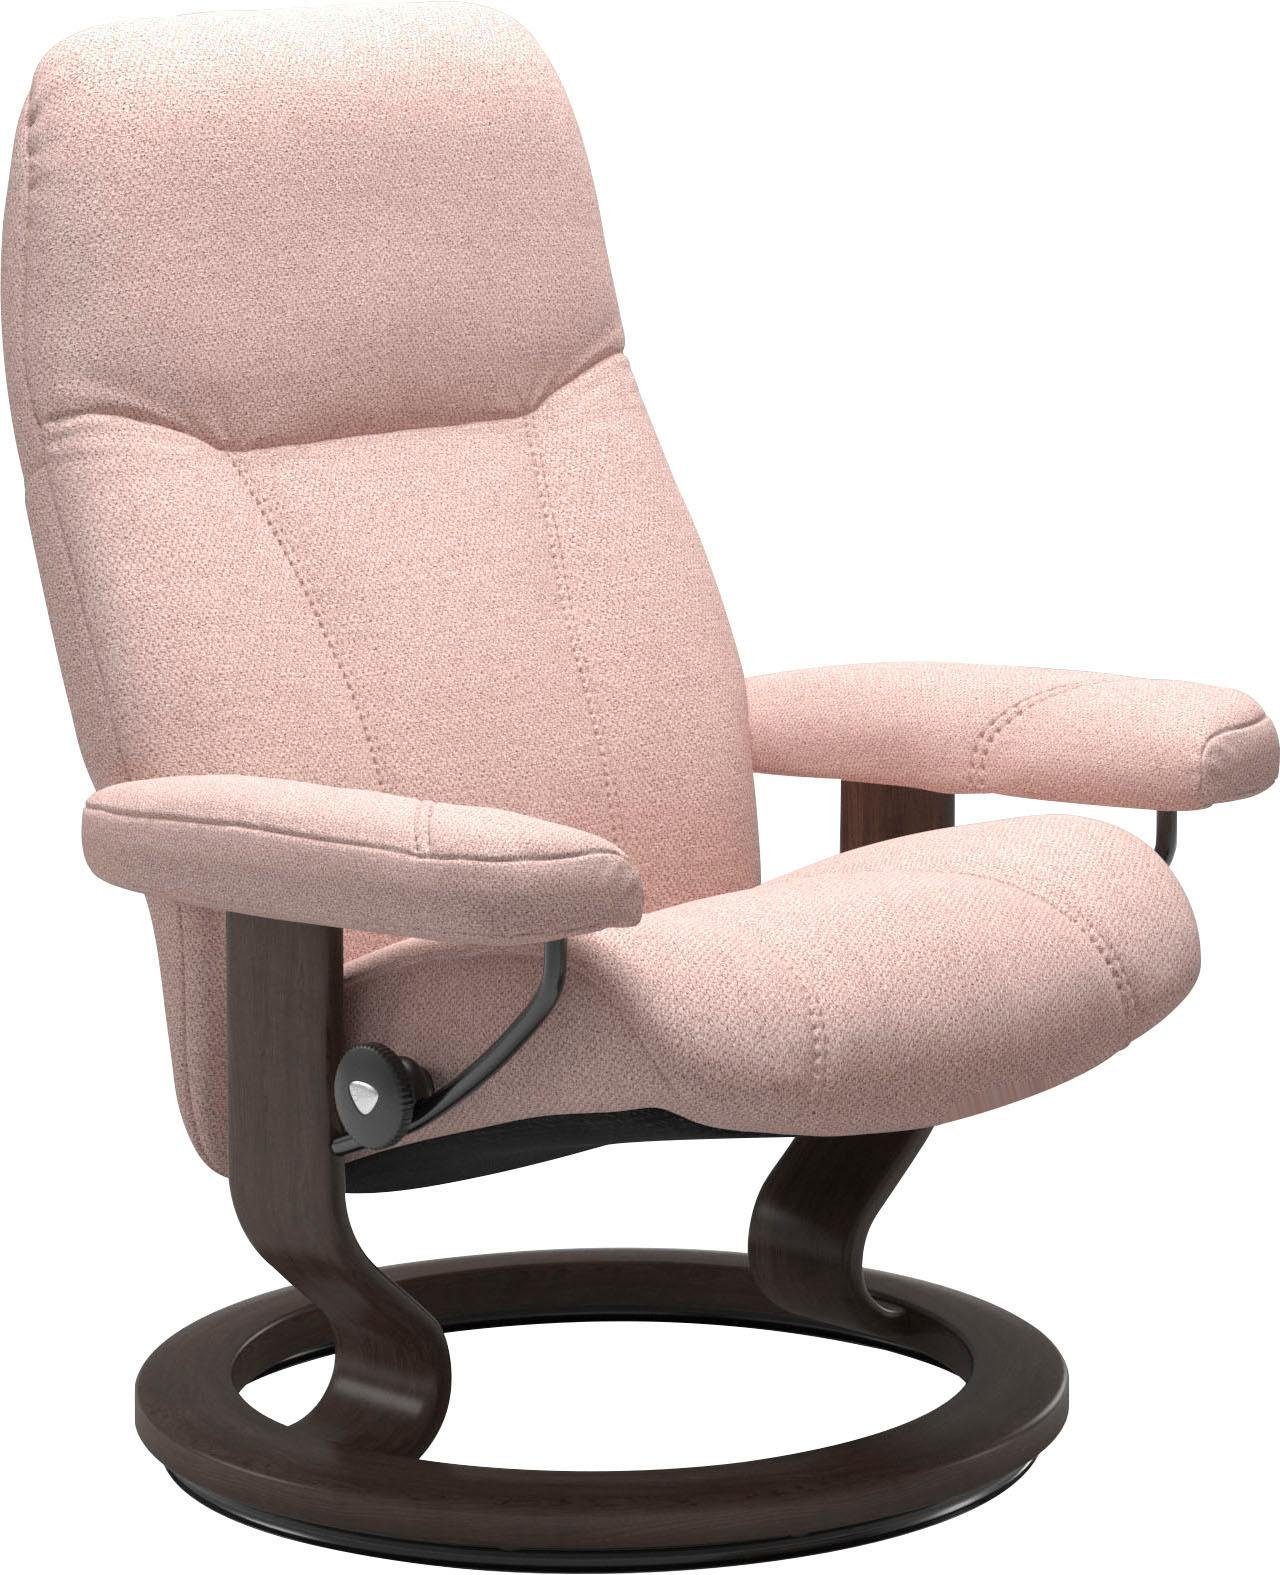 Stressless® Größe Consul, Gestell Wenge mit L, Classic Relaxsessel Base,